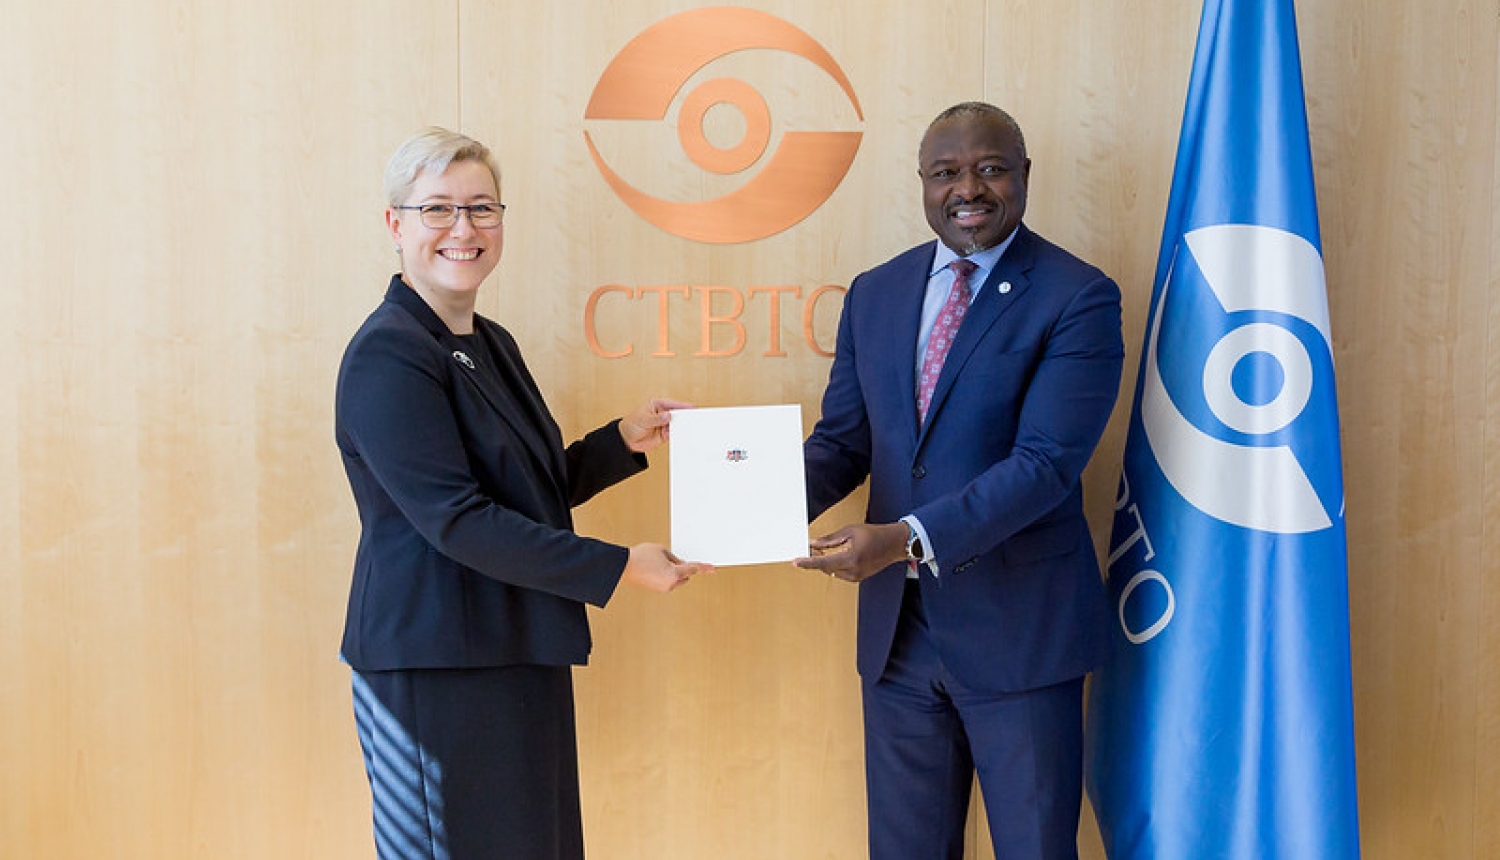 Latvian Ambassador presents her credentials to Executive Secretary of the Preparatory Commission for the Comprehensive Nuclear-Test-Ban Treaty Organization (CTBTO)